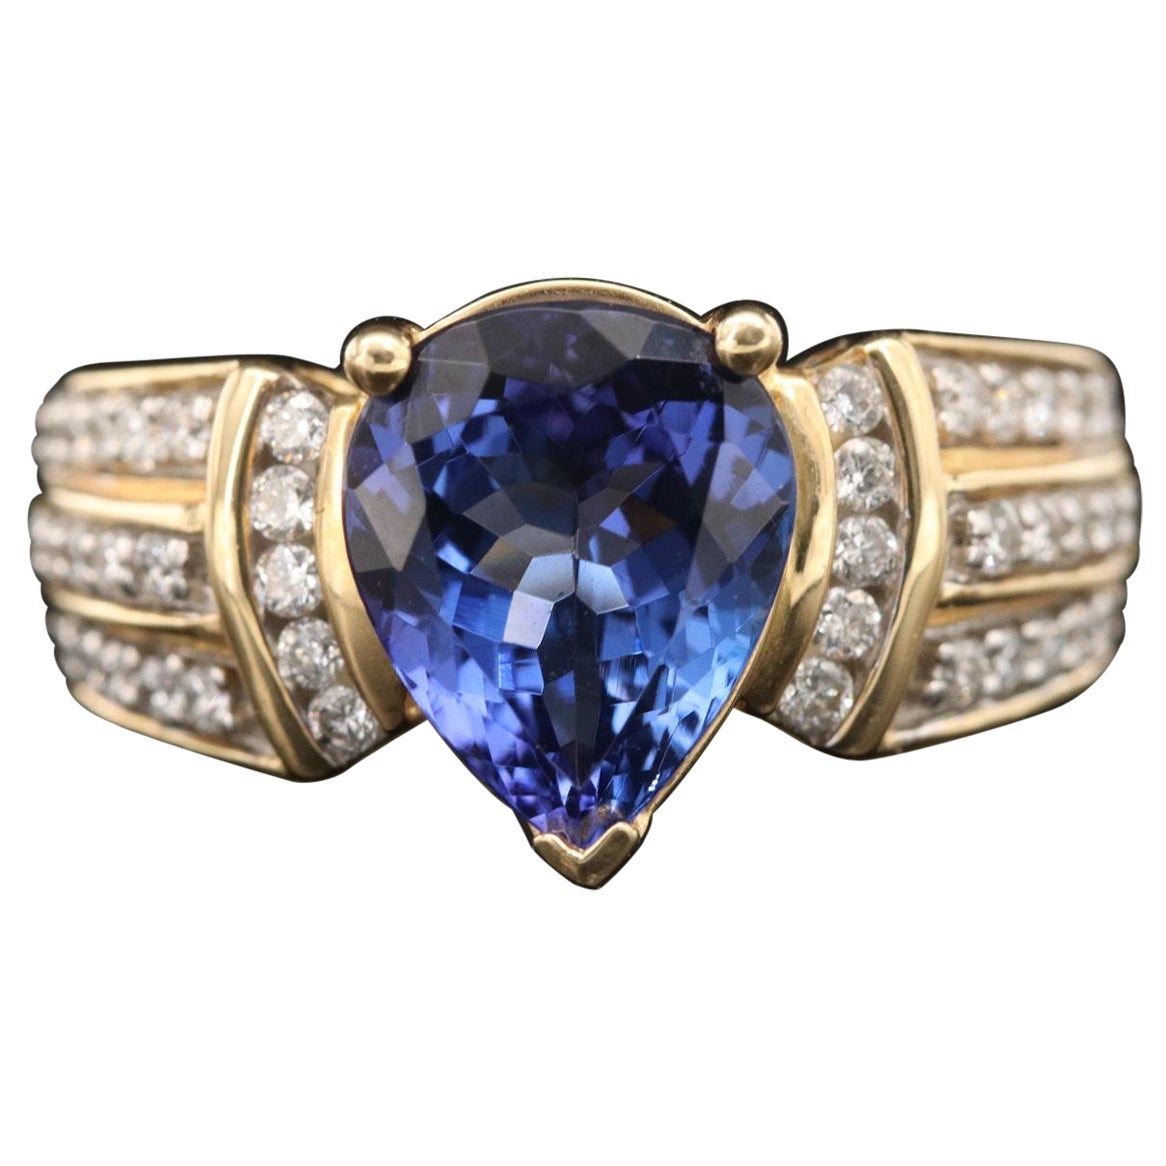 14K Yellow Gold 3.14 ctw Tanzanite and Diamond Ring Sz: 7.25 For Sale